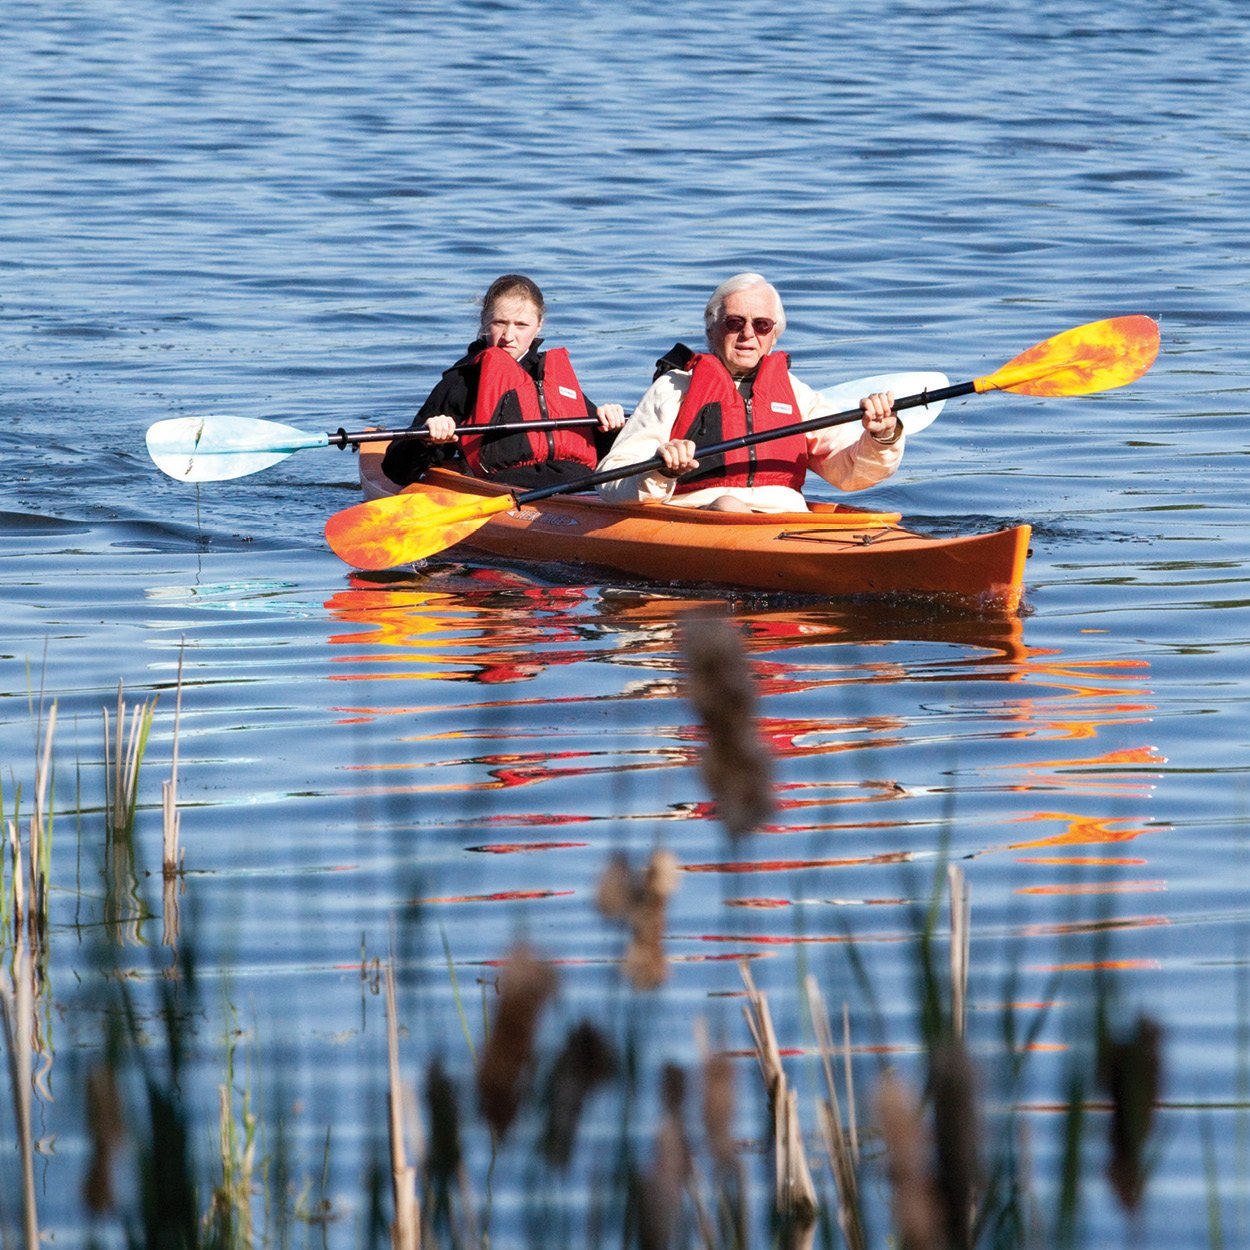 Two people in a kayak on a lake